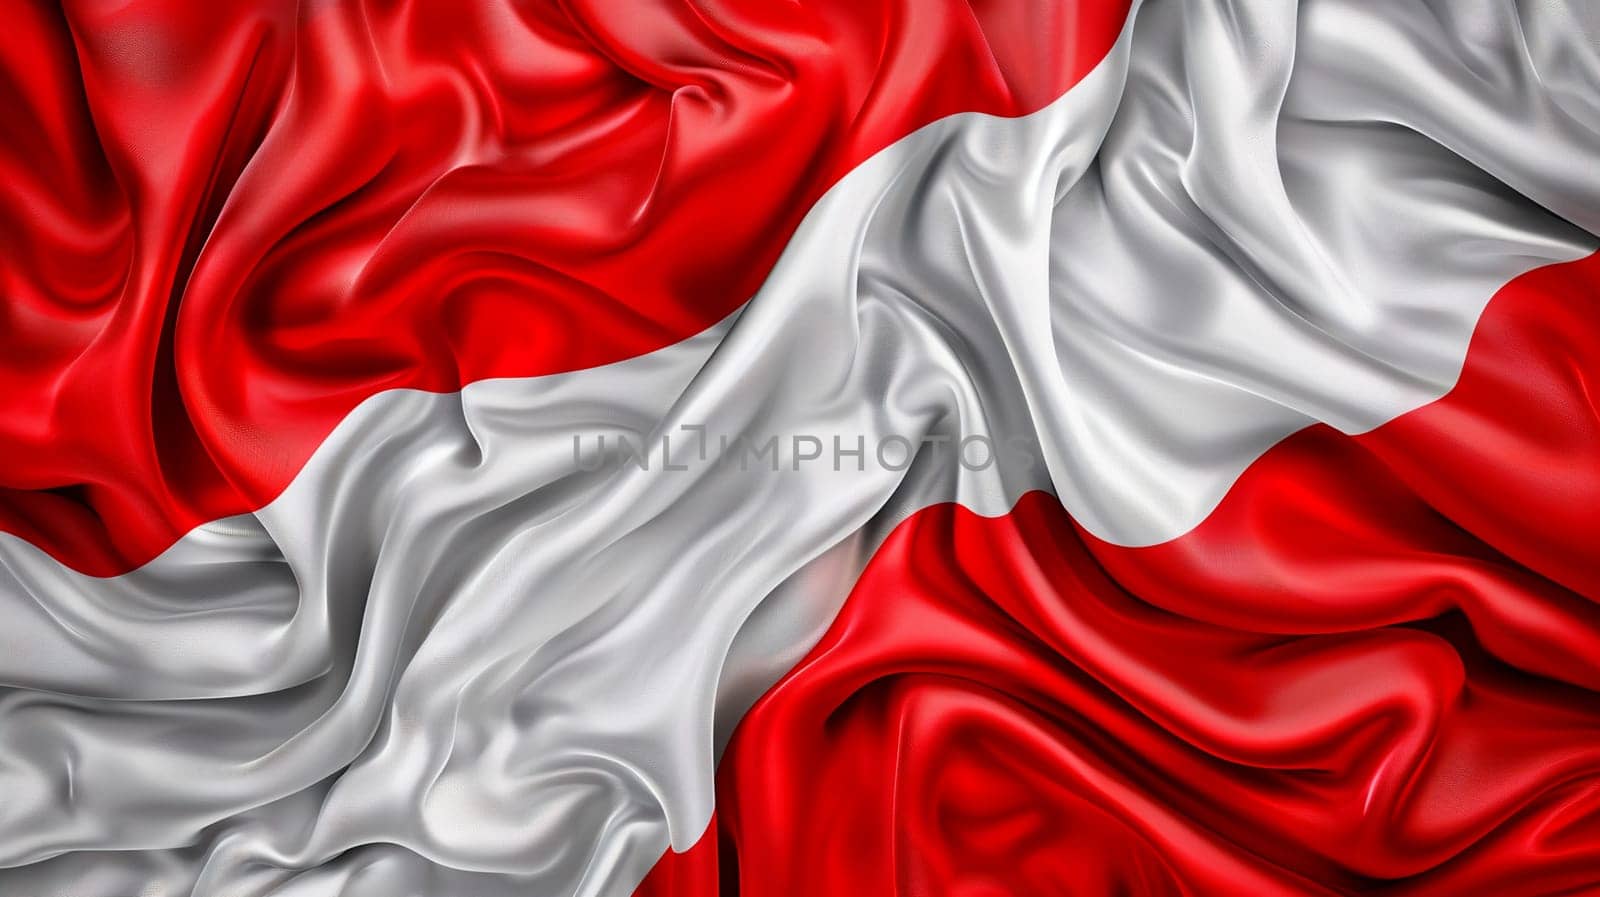 Vivid red and white silk fabric flowing elegantly, symbolizing Austrian flag. Perfect for backgrounds representing national pride, design quality.